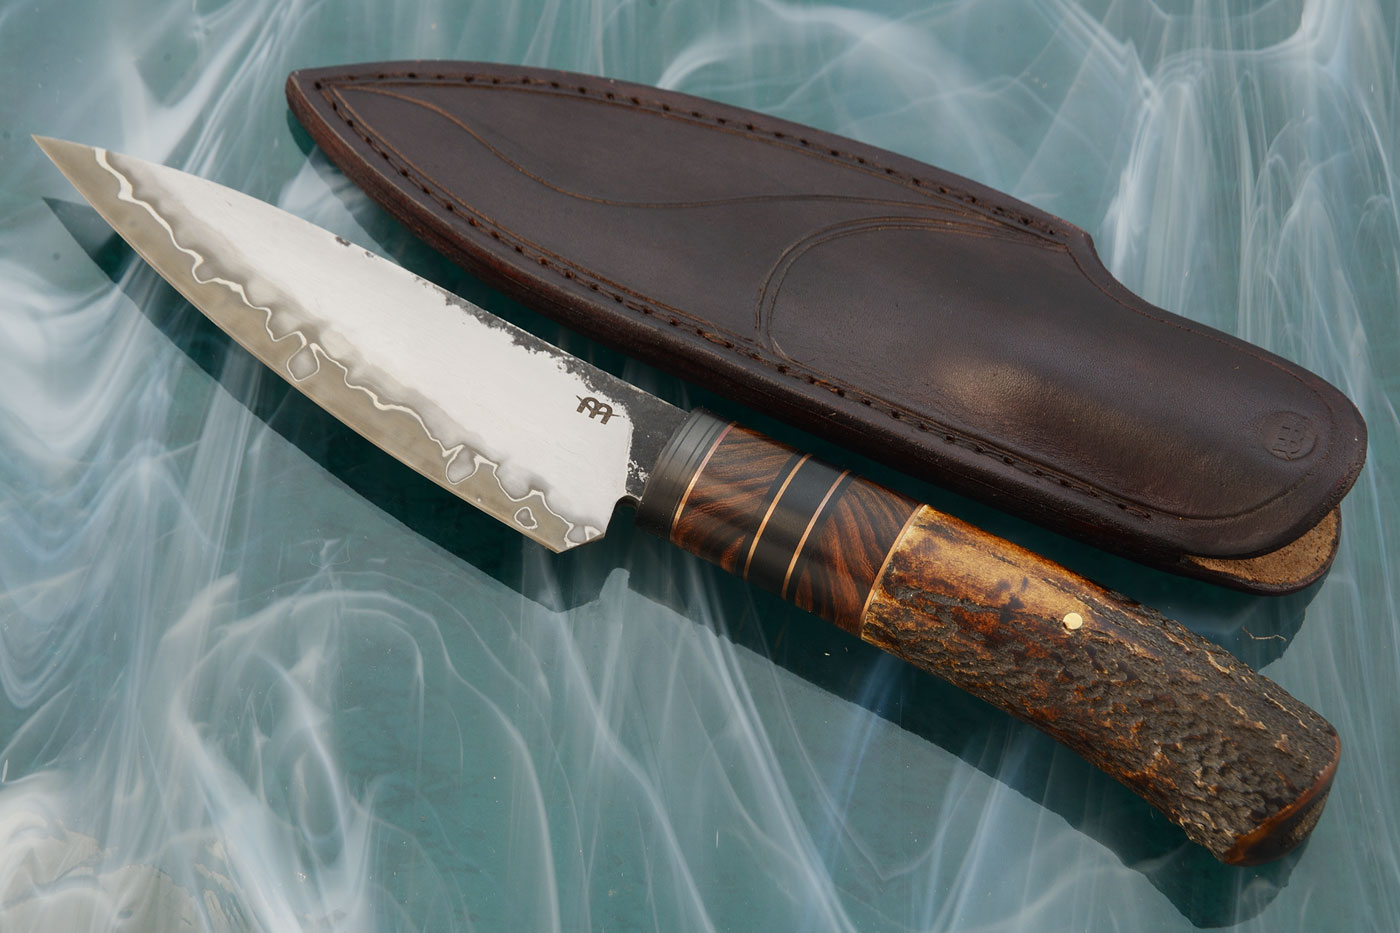 Utilitarian: San Mai Belt Knife with Ironwood and Stag